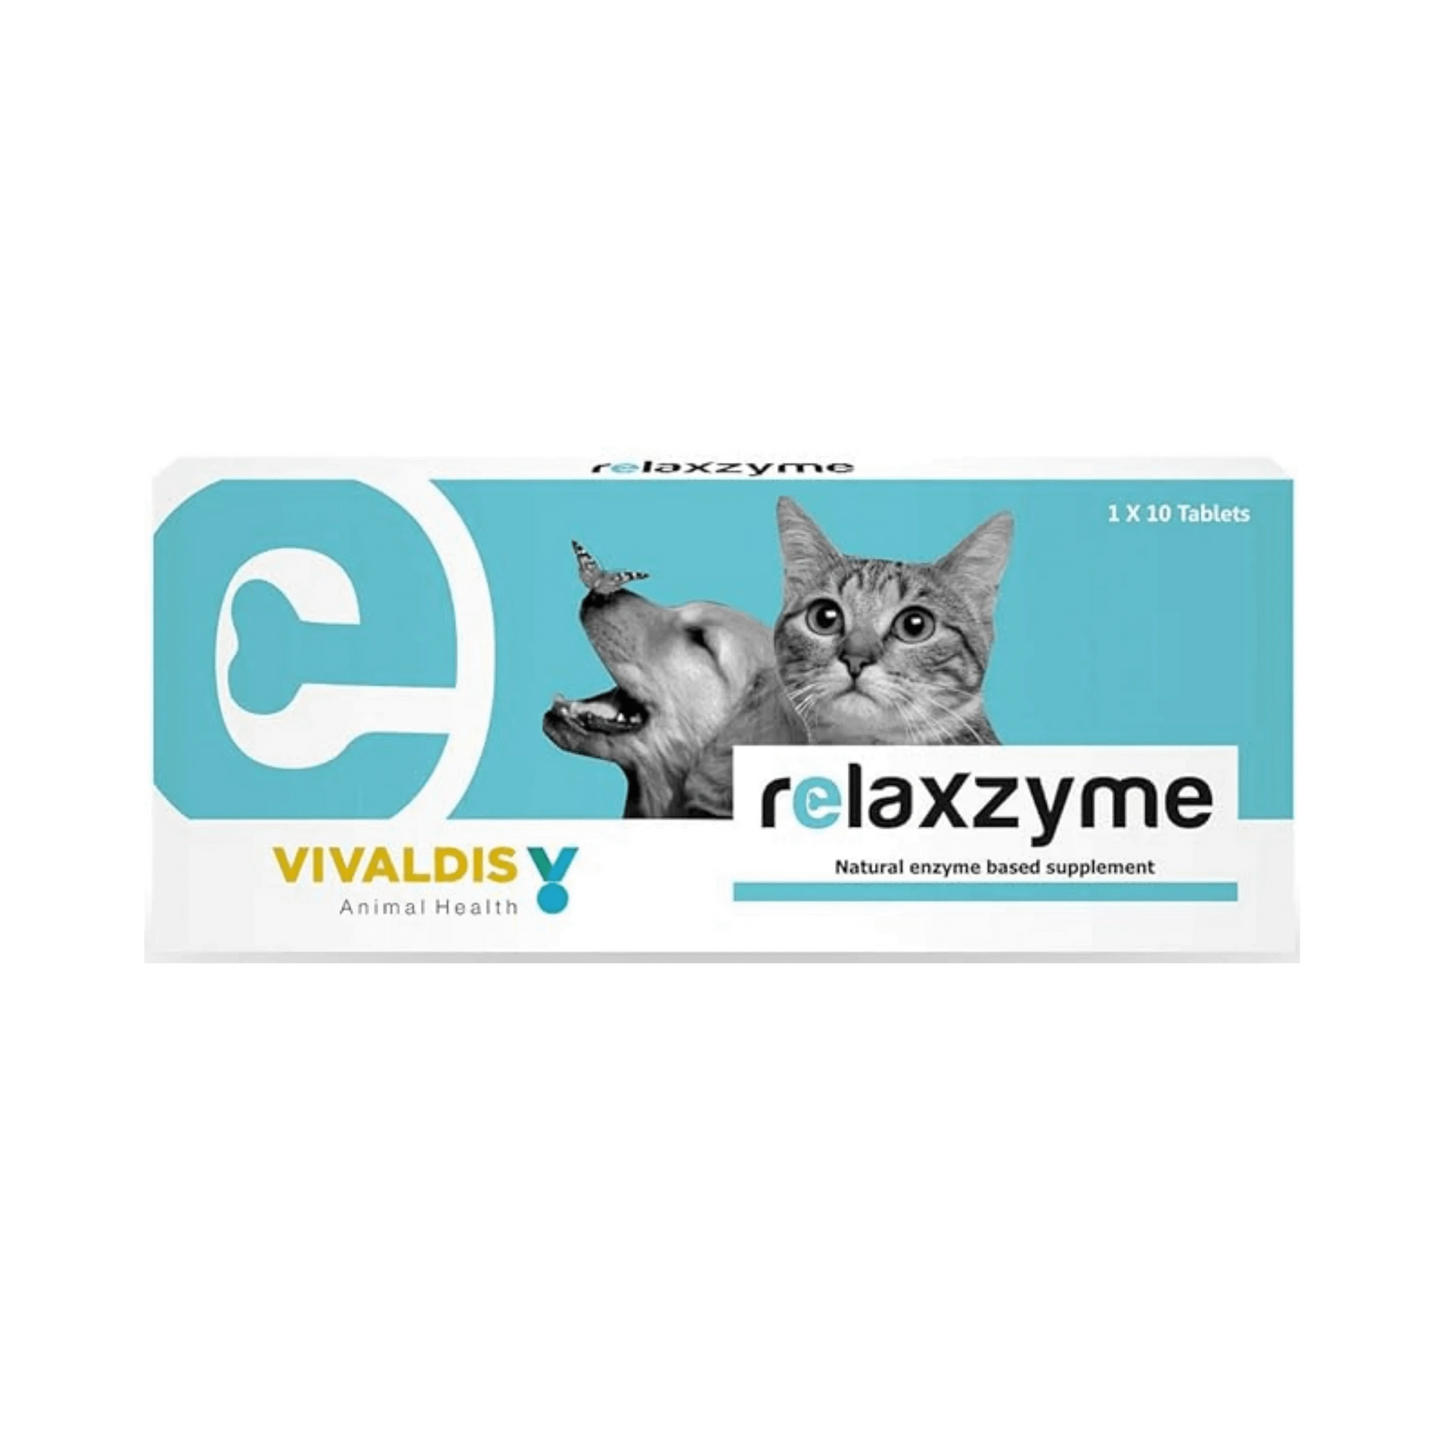 RELAXZYME SMALL TABLET - Animeal